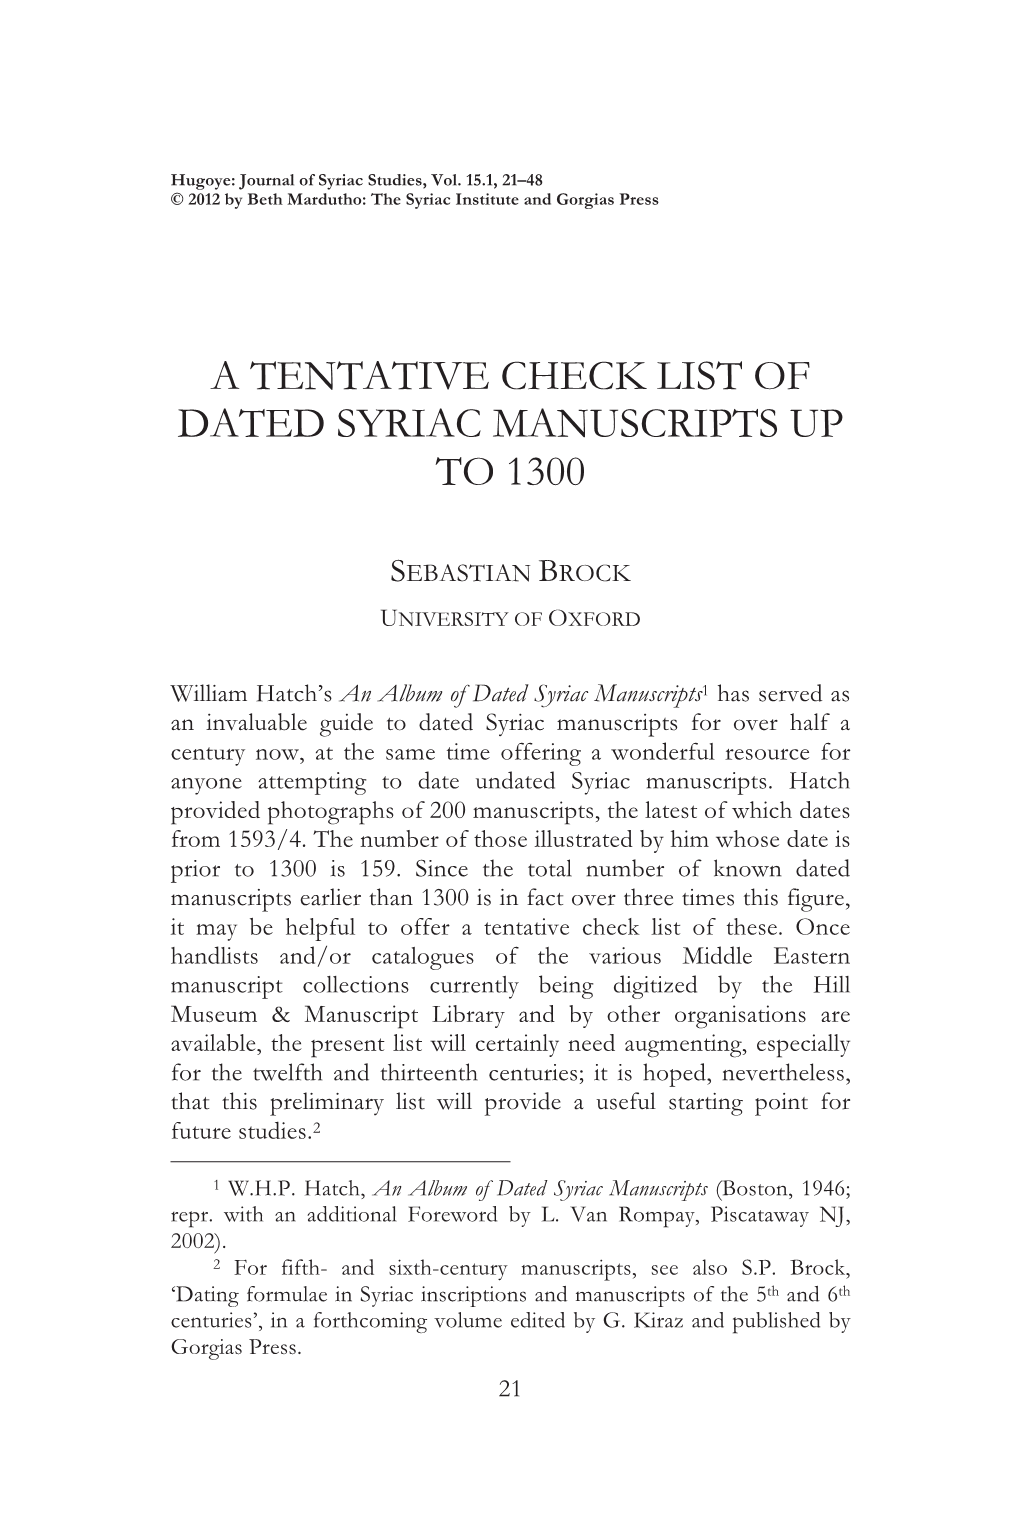 A Tentative Check List of Dated Syriac Manuscripts up to 1300